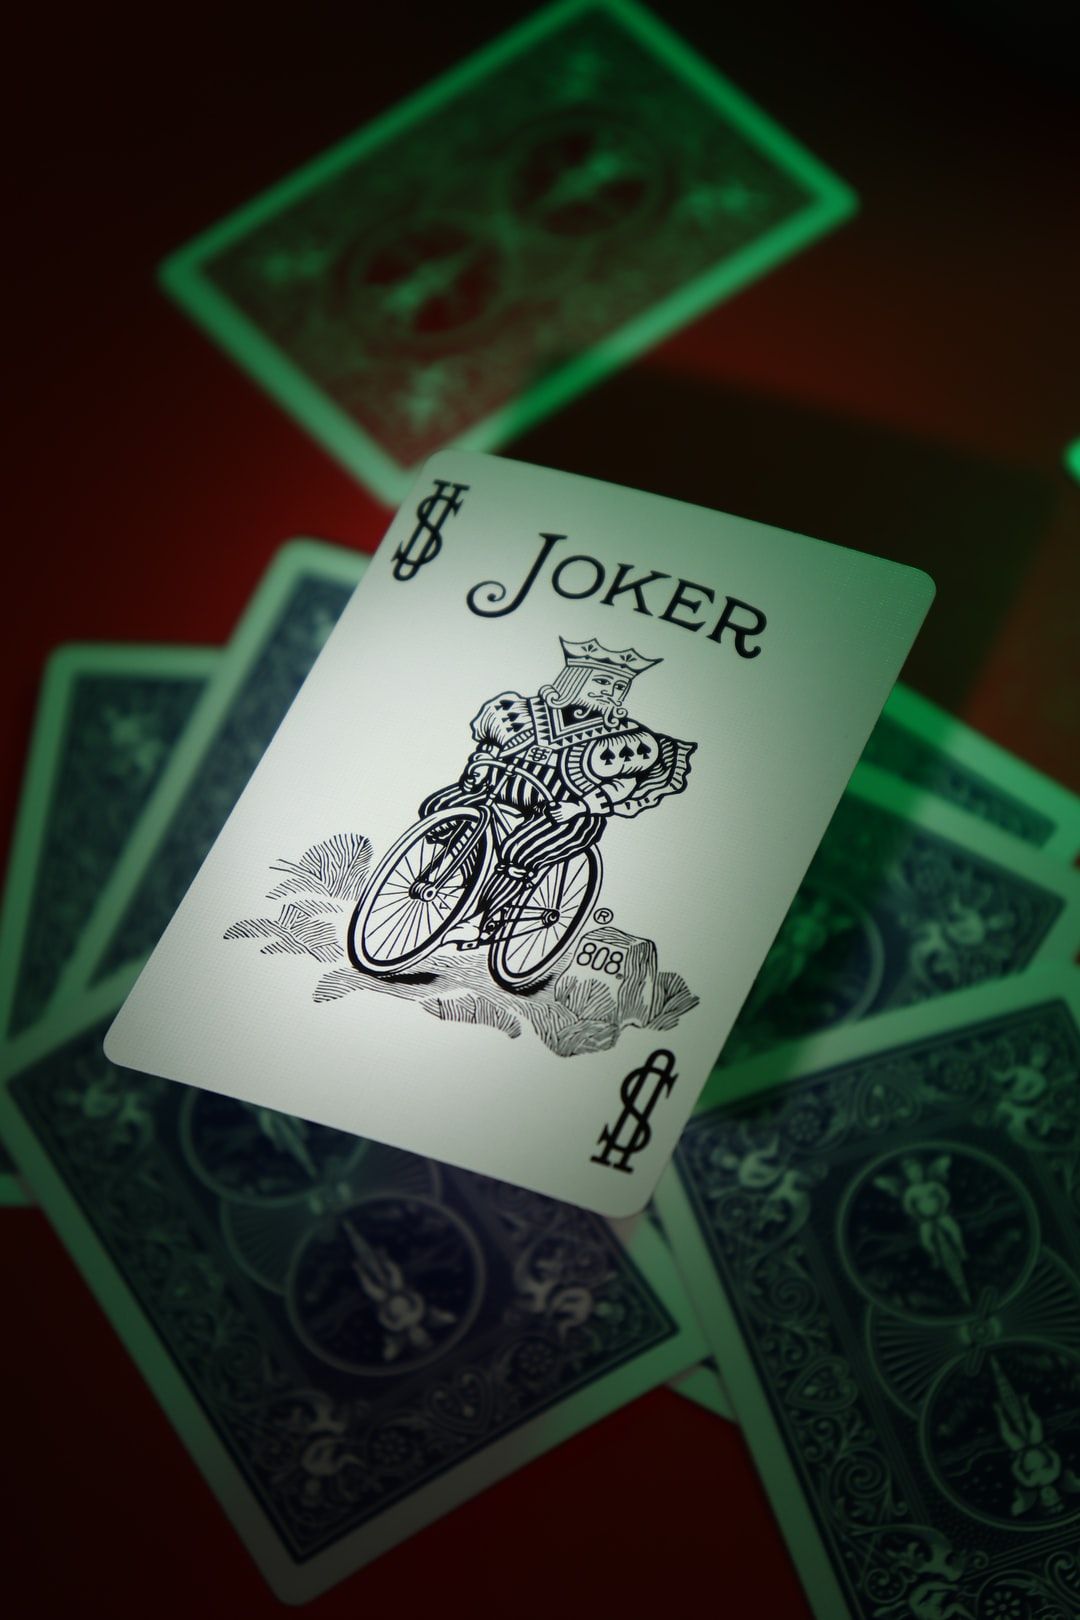 joker playing card on playing cards photo